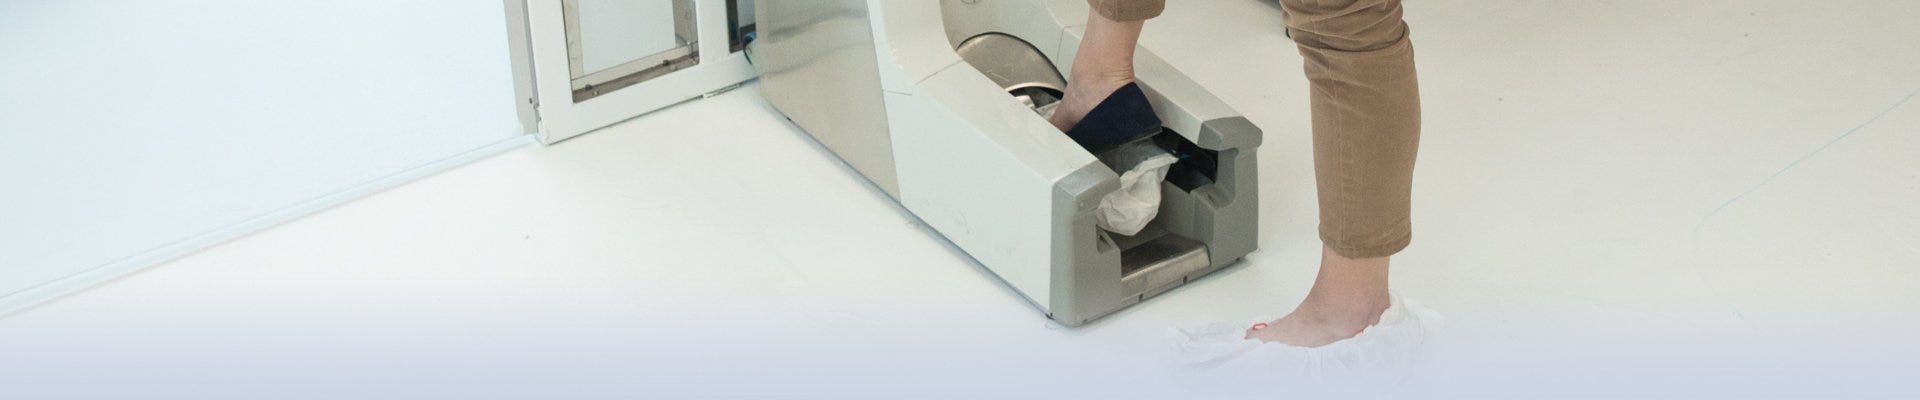 Easy-to-operate automated shoe cleaner uses internal brushed wit h a vacuum that ensures fast and effective shoe cleaning